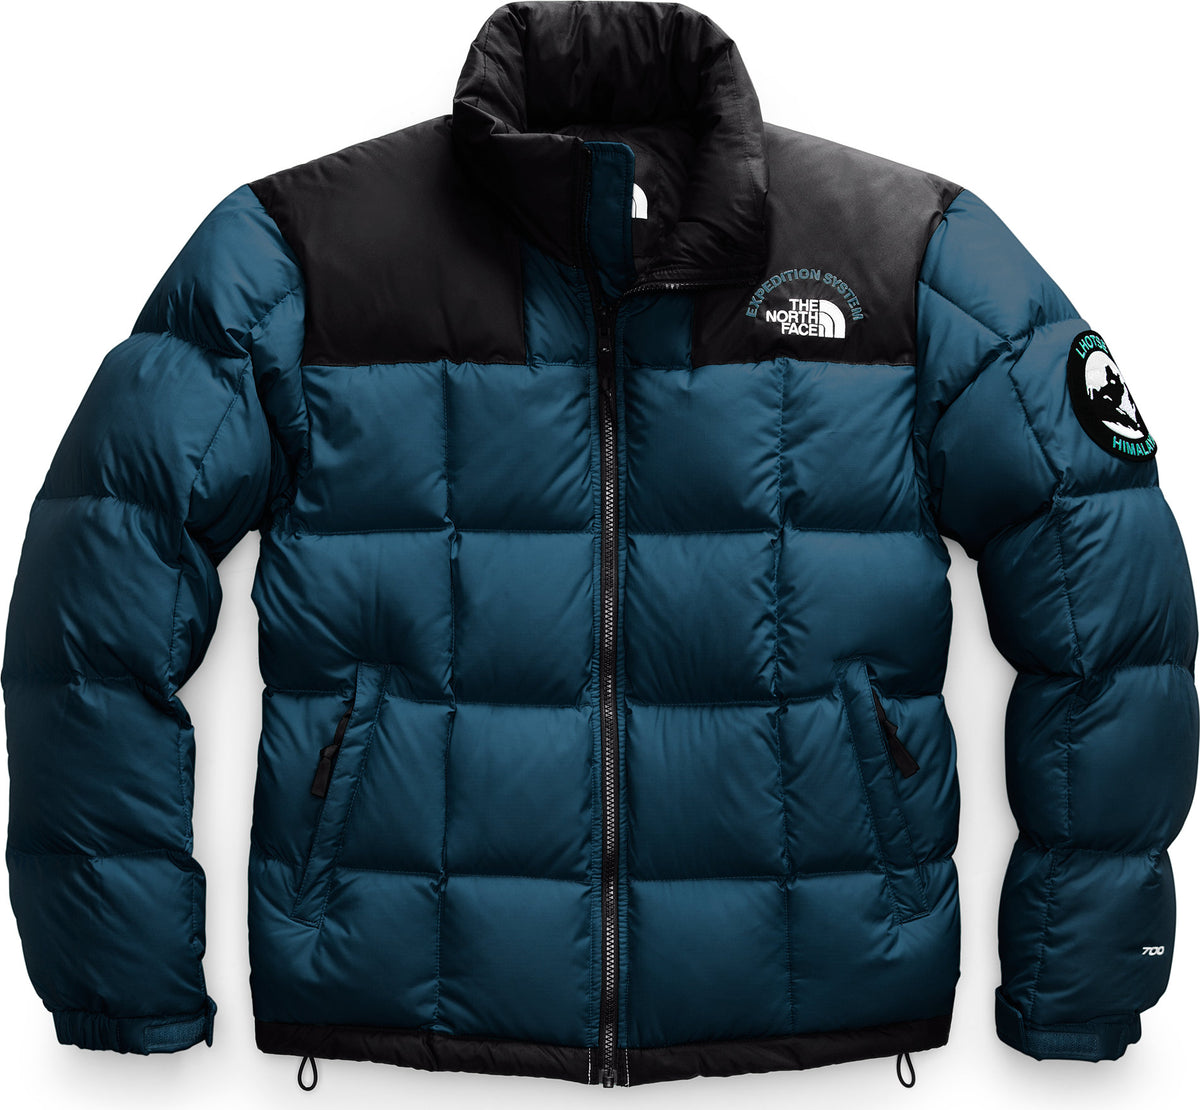 the north pole jackets